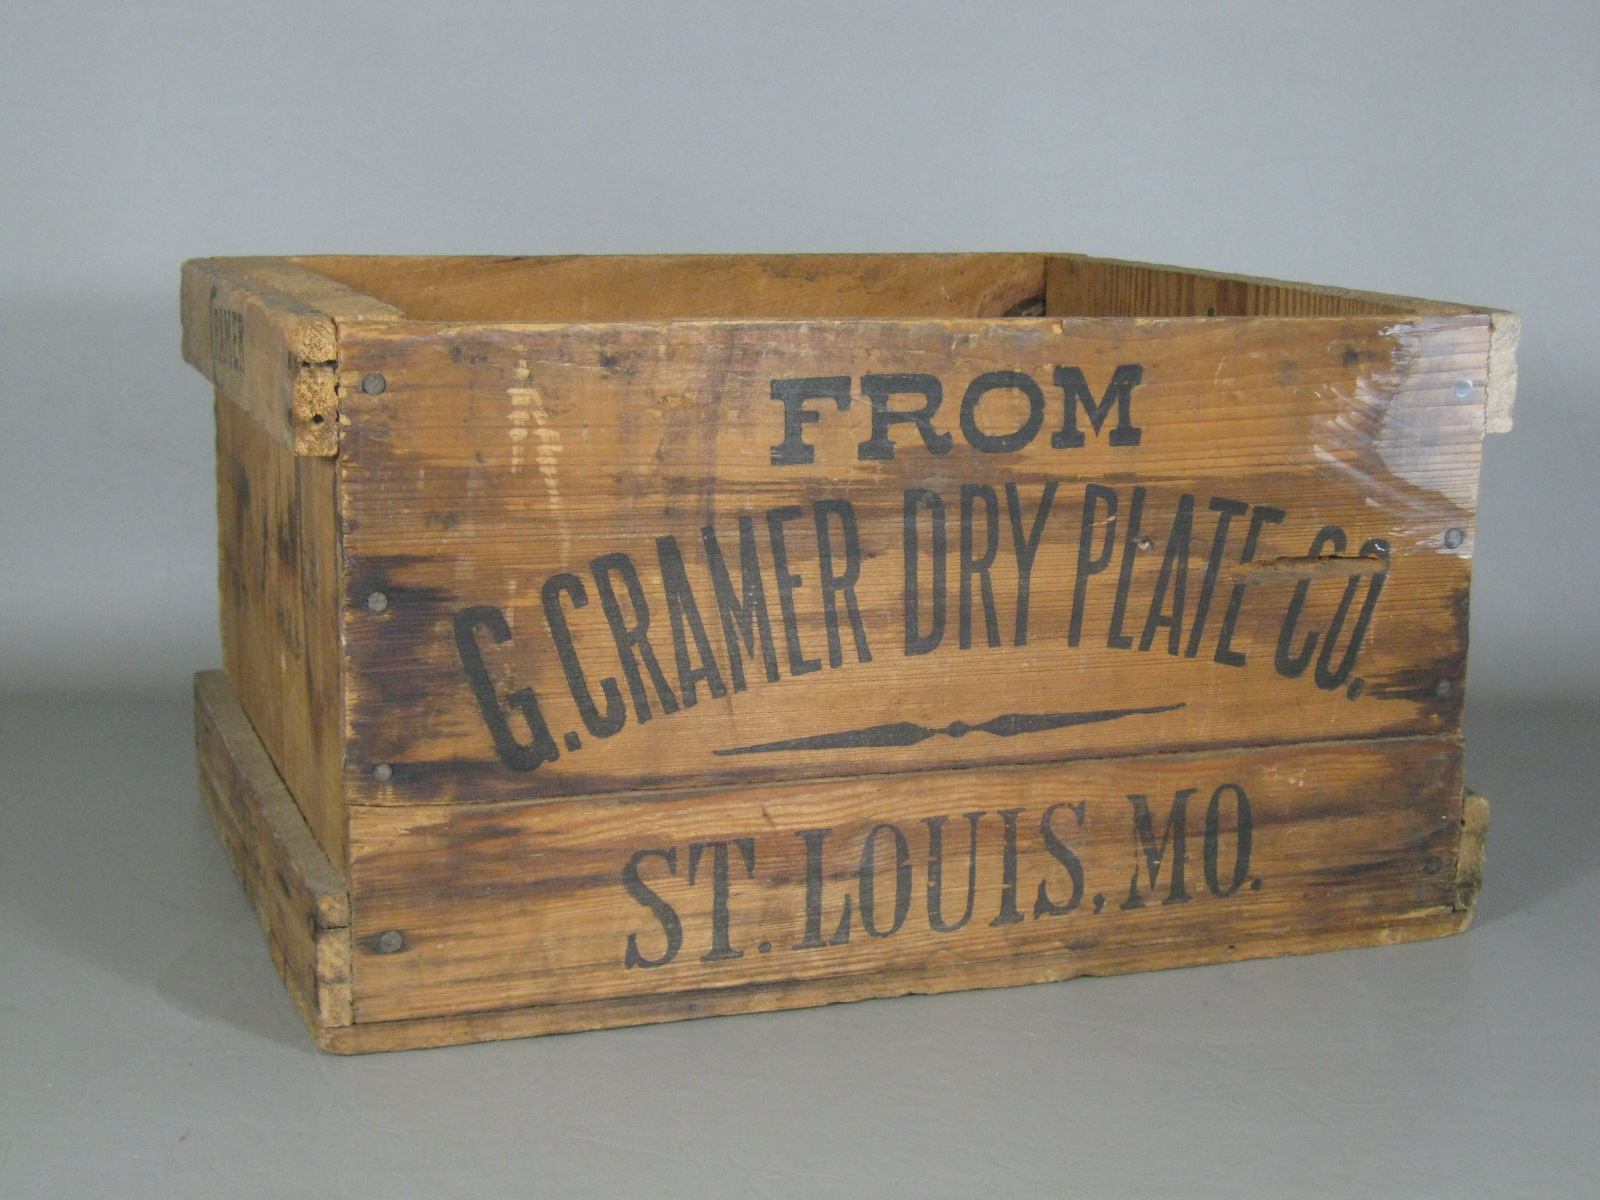 Antique 1800s Cramer Dry Plate Photo Negatives Wood Wooden Crate Box St. Louis 2